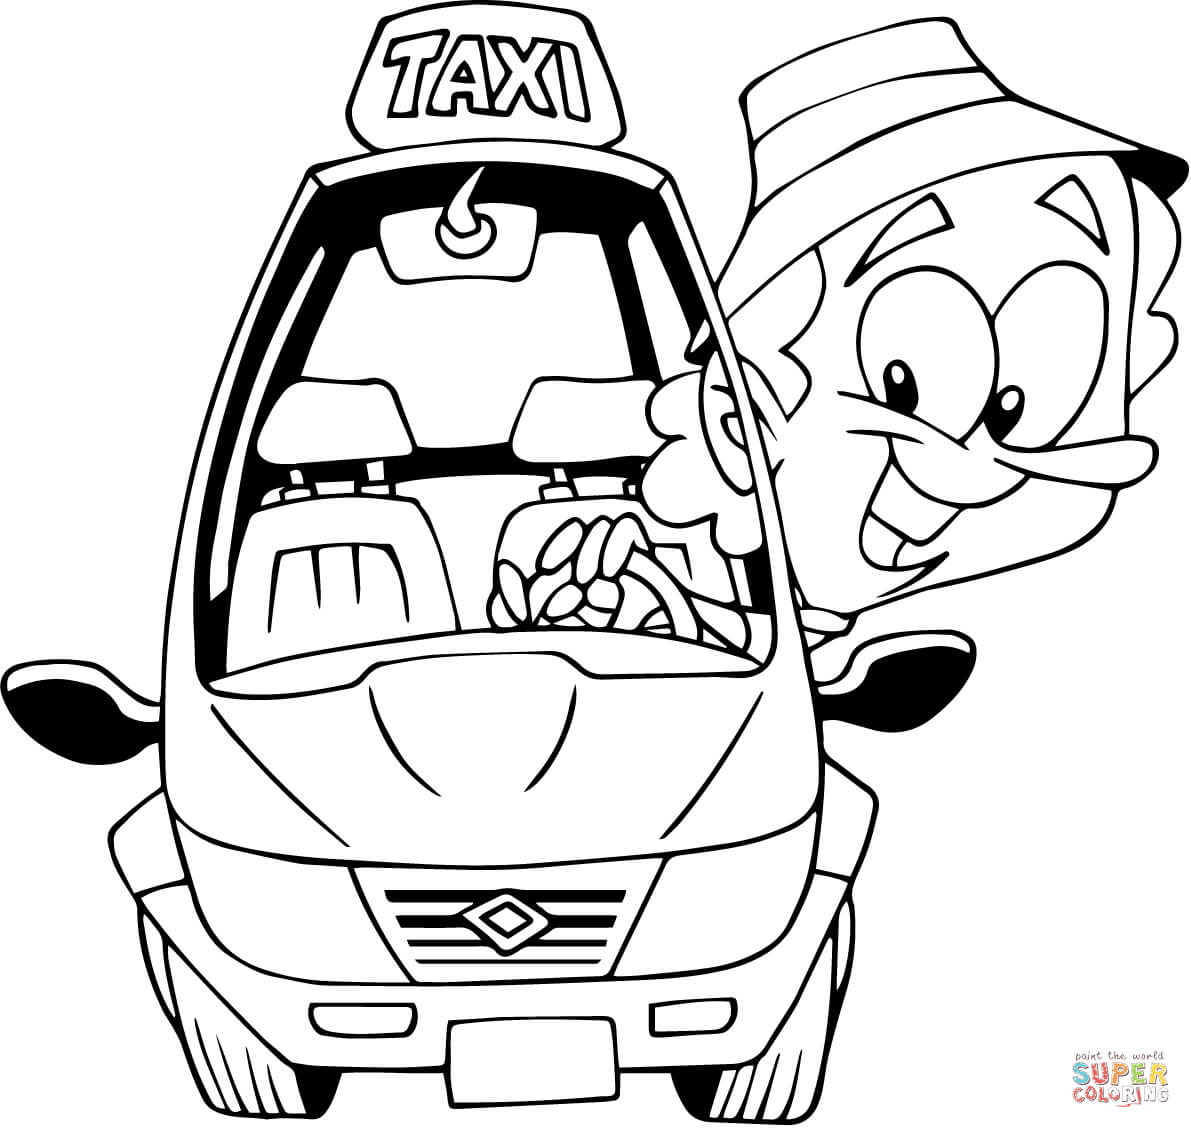 Snowmobile Driver coloring page | Free Printable Coloring Pages